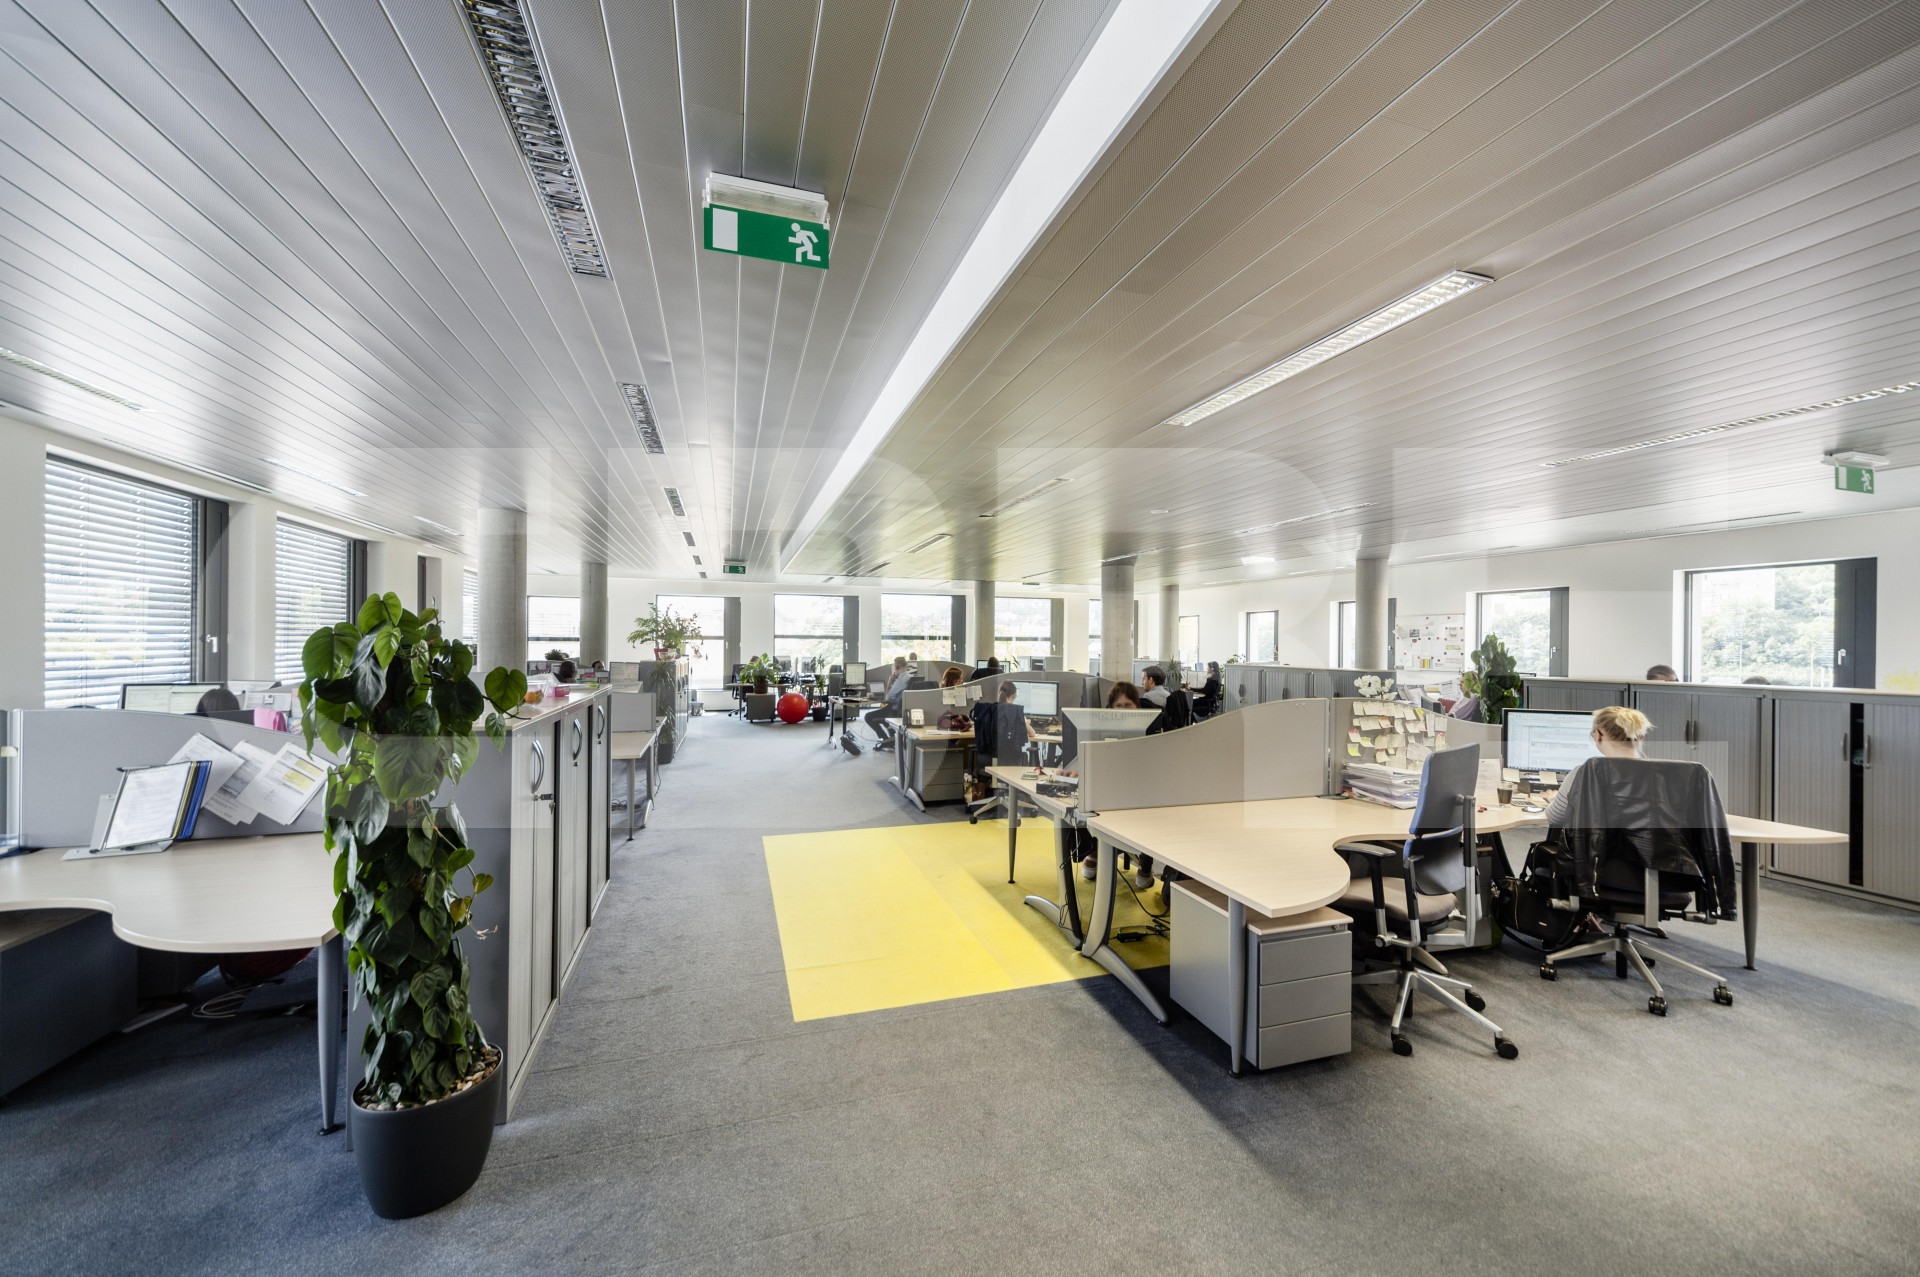 Offices to let in Factory Office Center in Prague | CBRE Properties